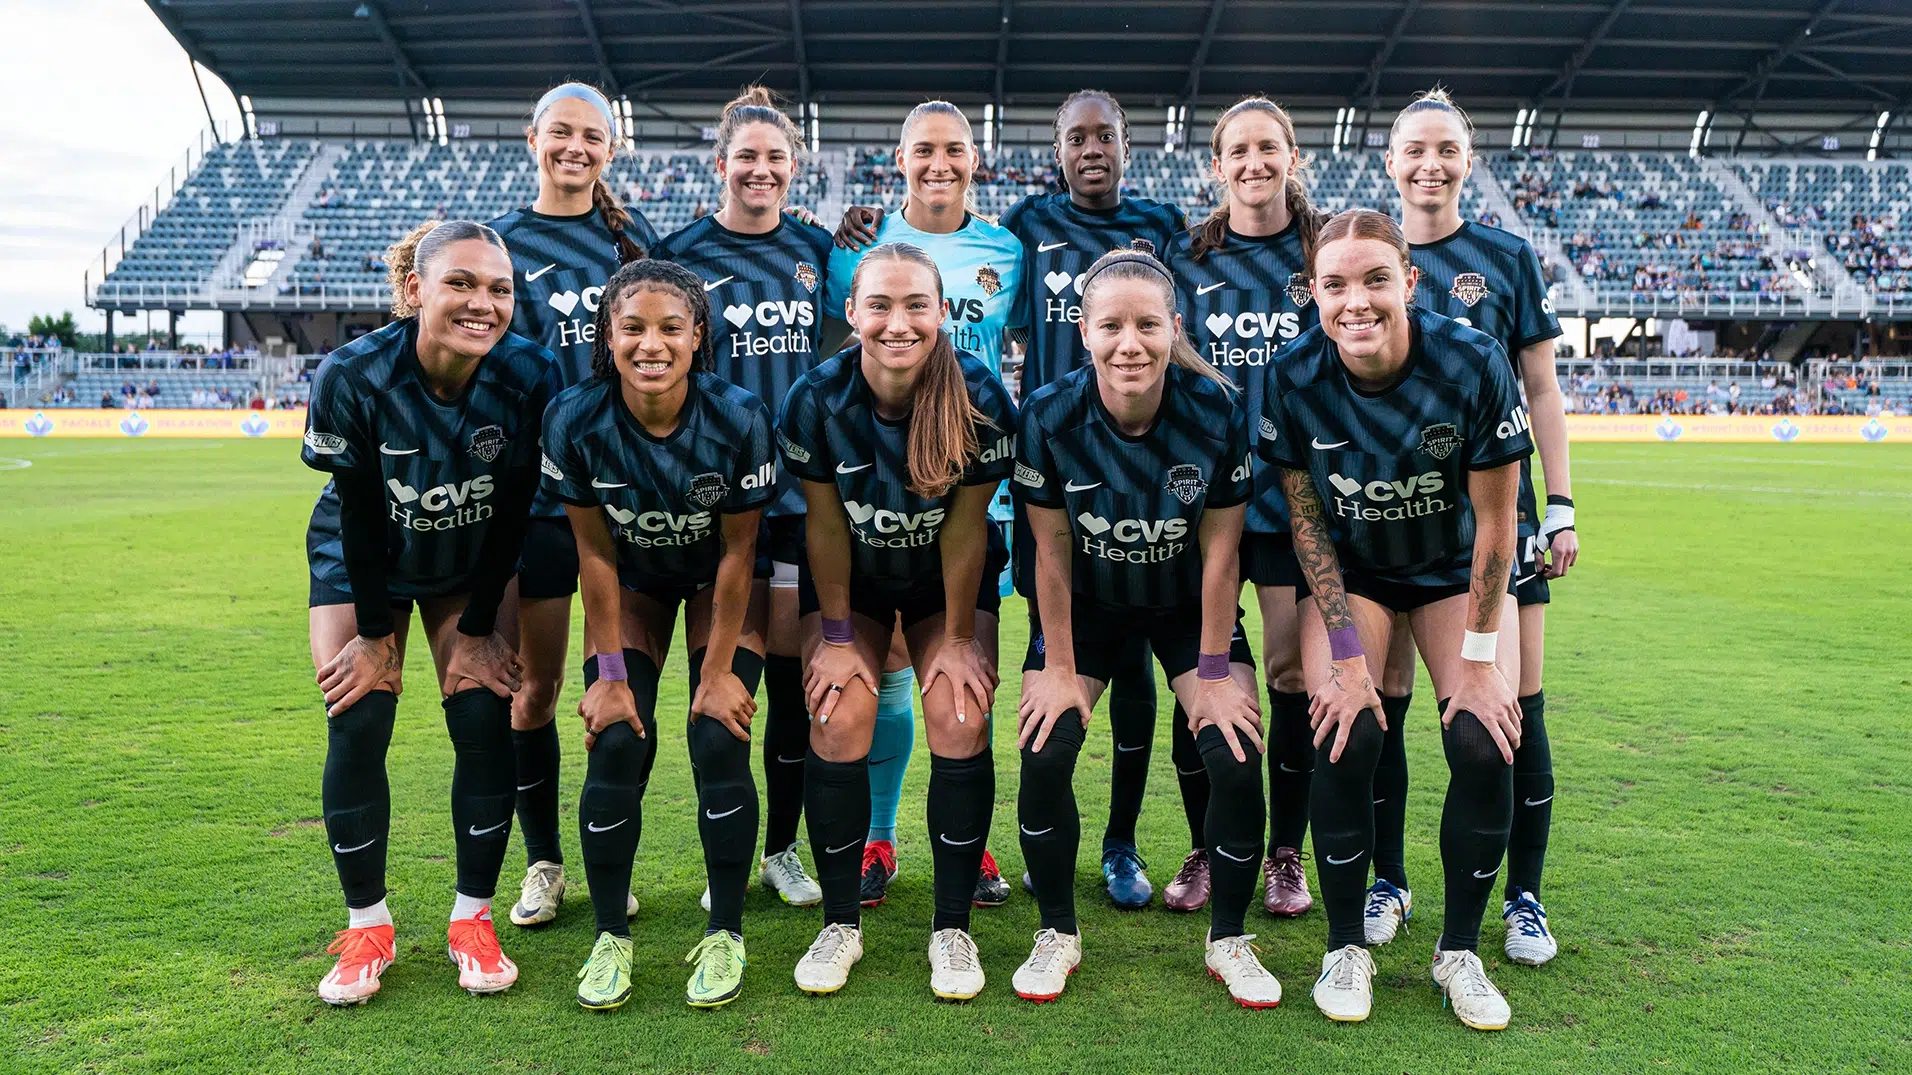 The starting eleven for the Washington Spirit pose for a photo in two rows. In the middle of the back row, Aubrey Kingsbury wears a bright blue keeper jersey.